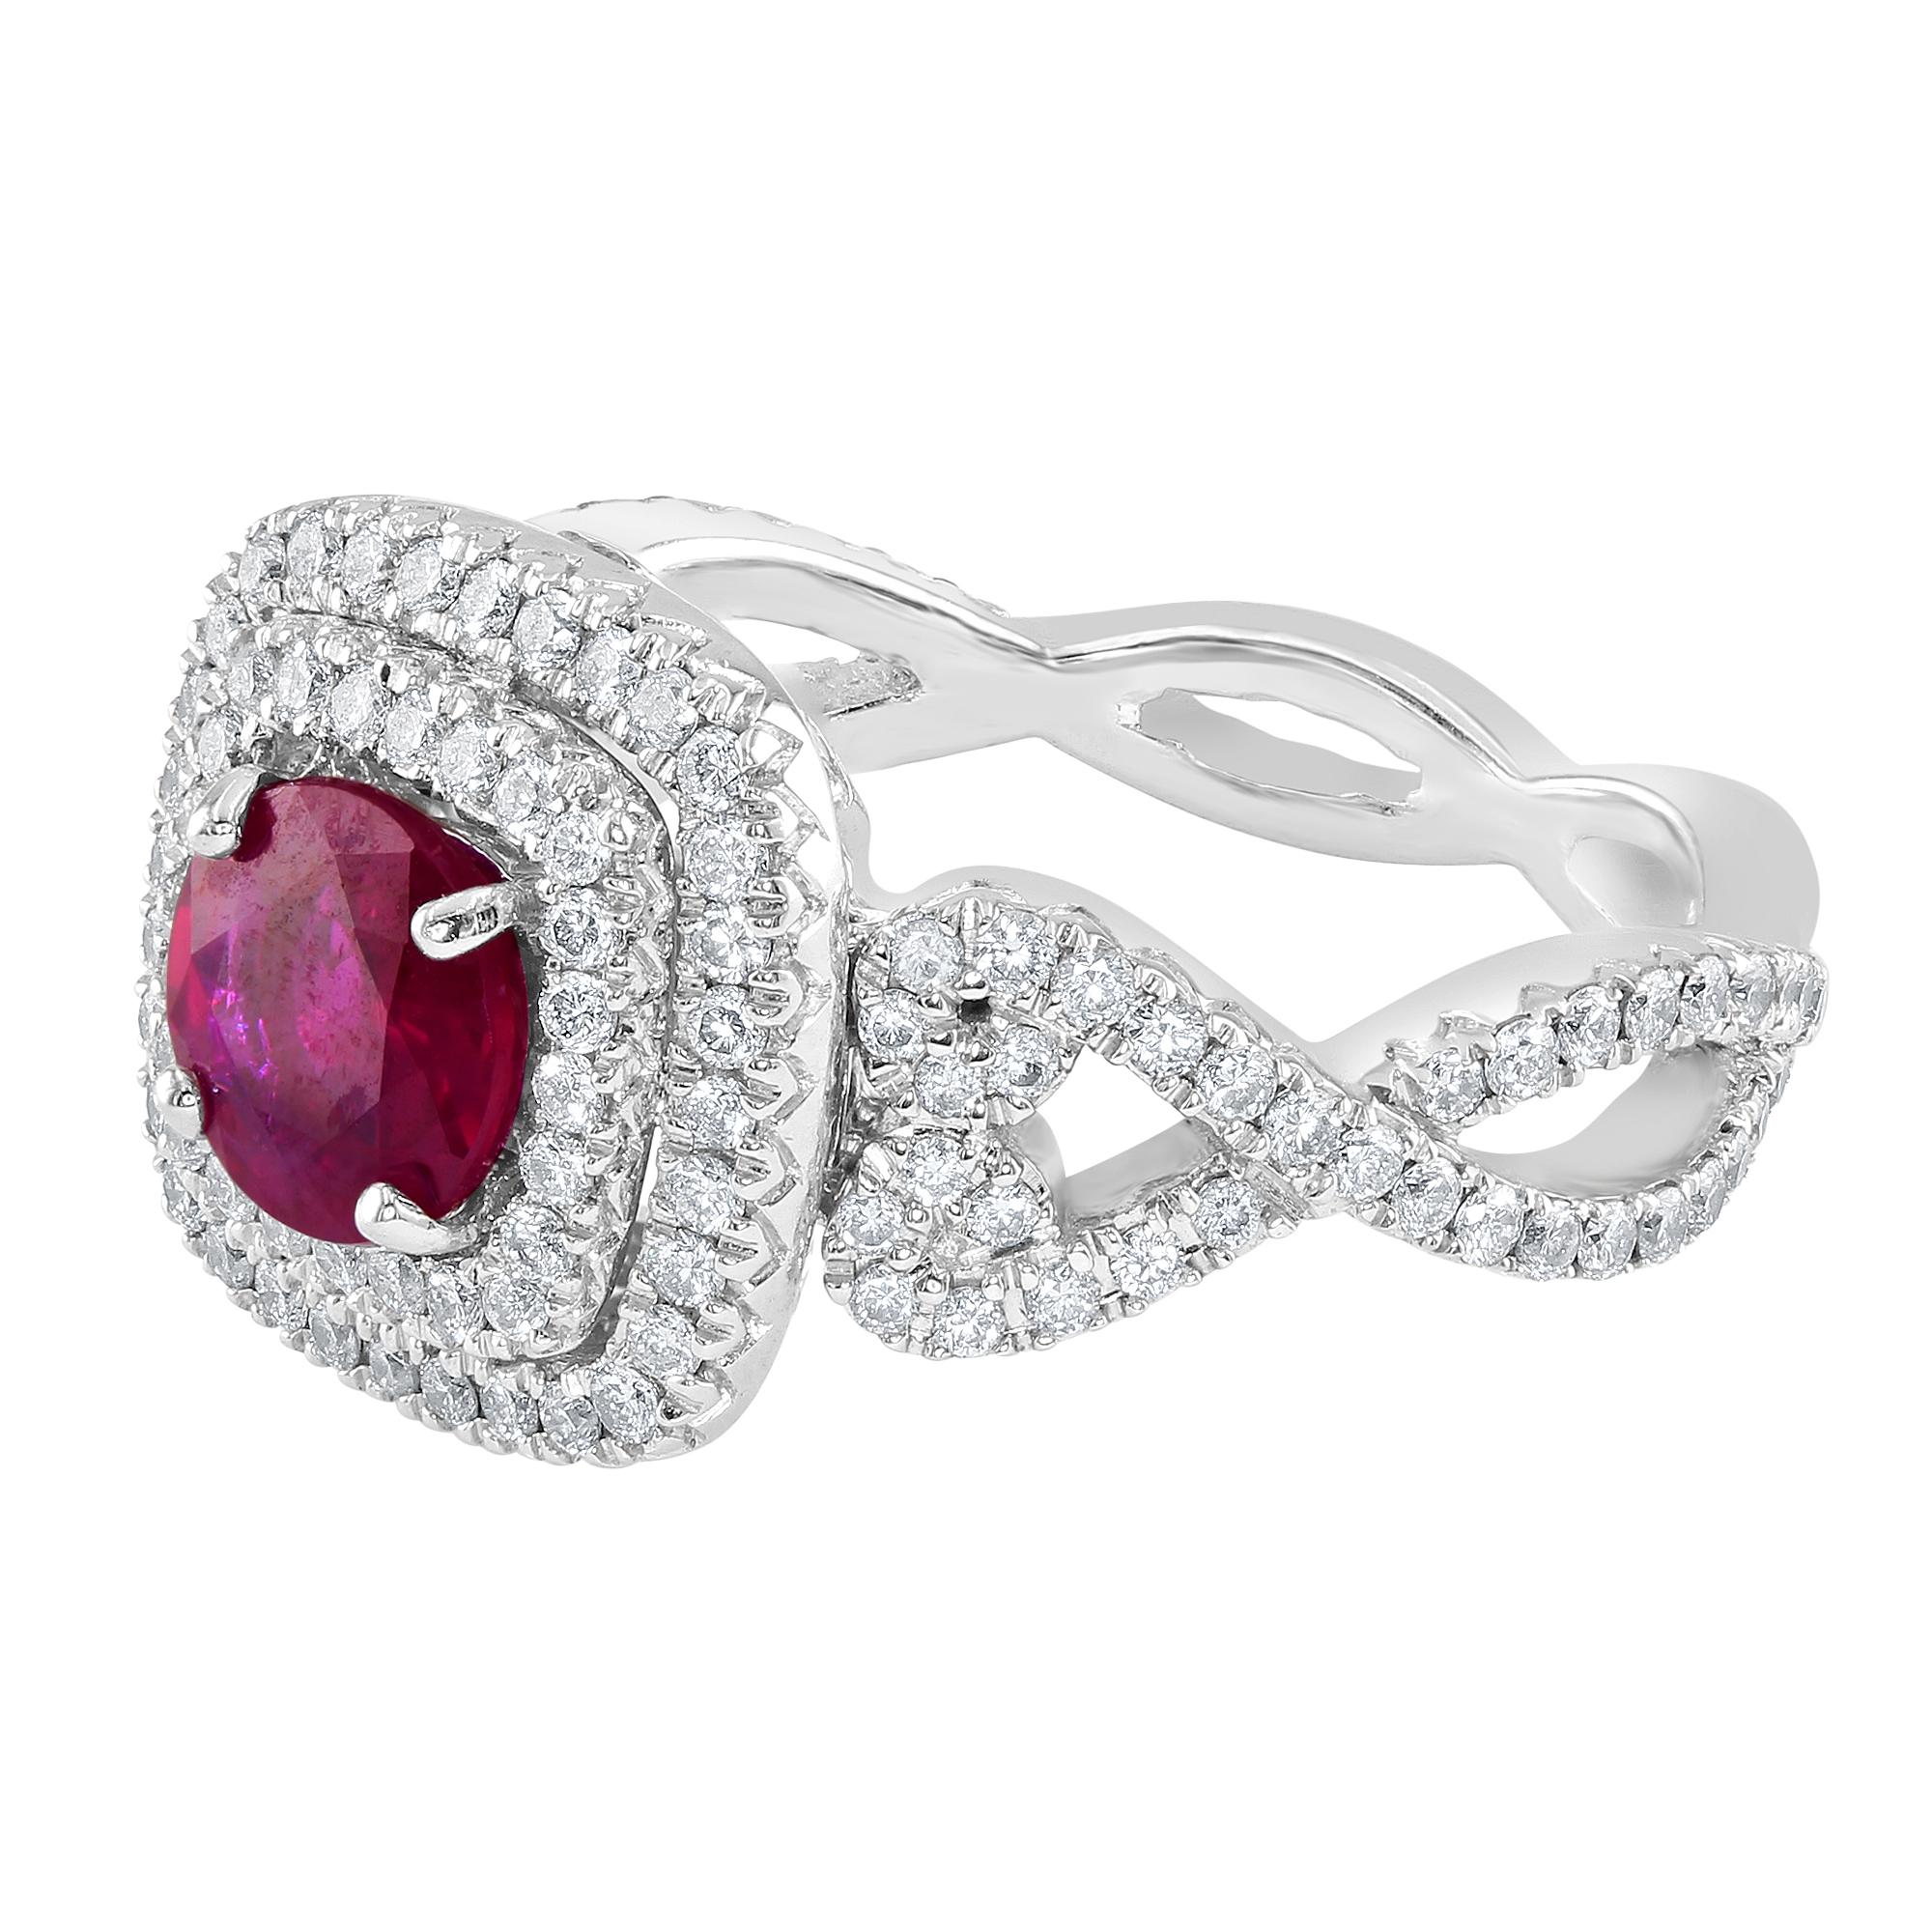 1.04 carat Ruby, surrounded by double halo round diamonds. Underneath the Ruby, there is a gallery with beautiful designs, including a single round white diamond in each corner. The beautiful crossover shank is embellished with diamonds on each